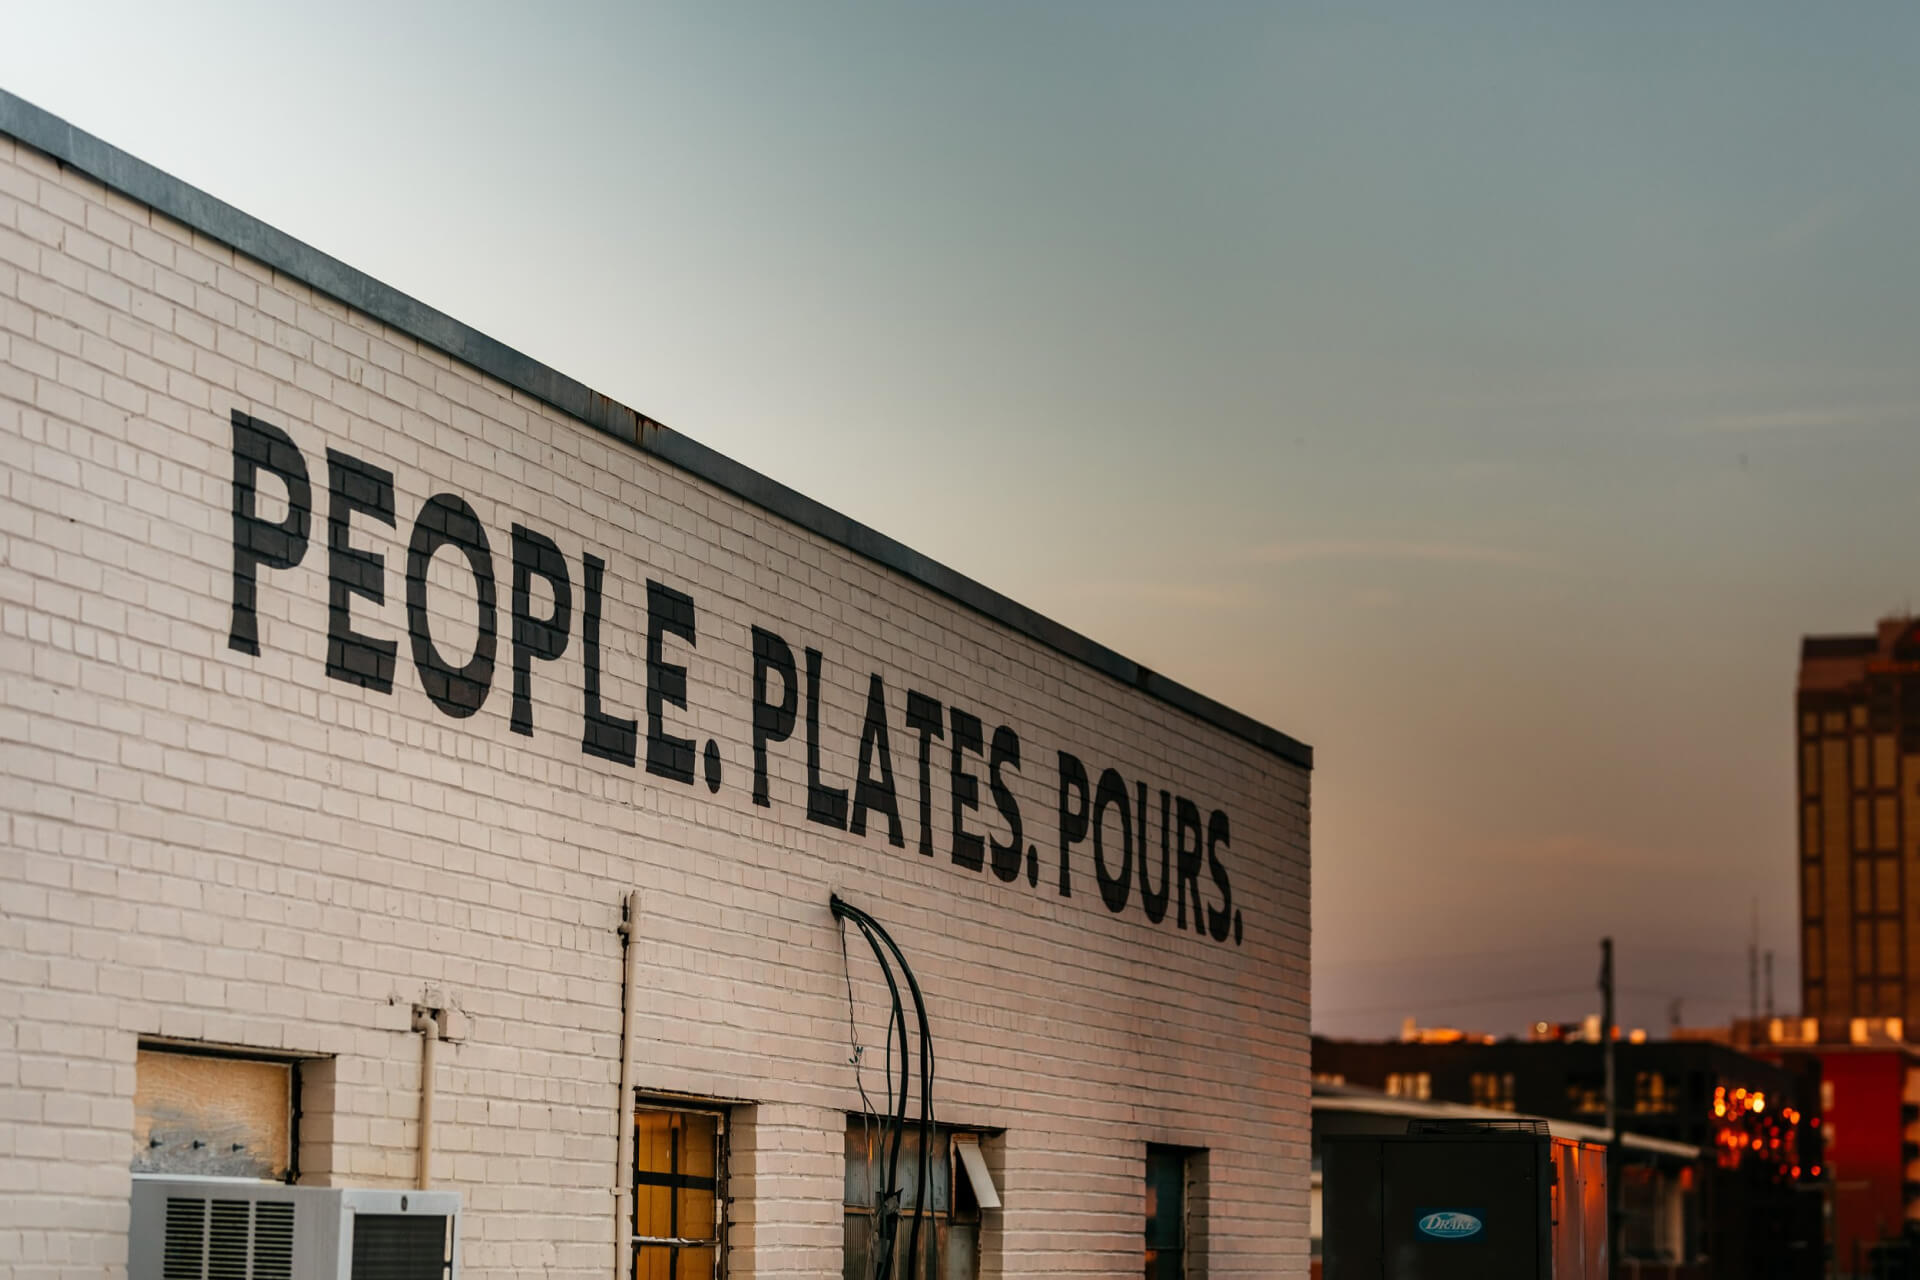 People, Plates & Pours signage painted on the wall at Wye Hill Brewing in Downtown Raleigh